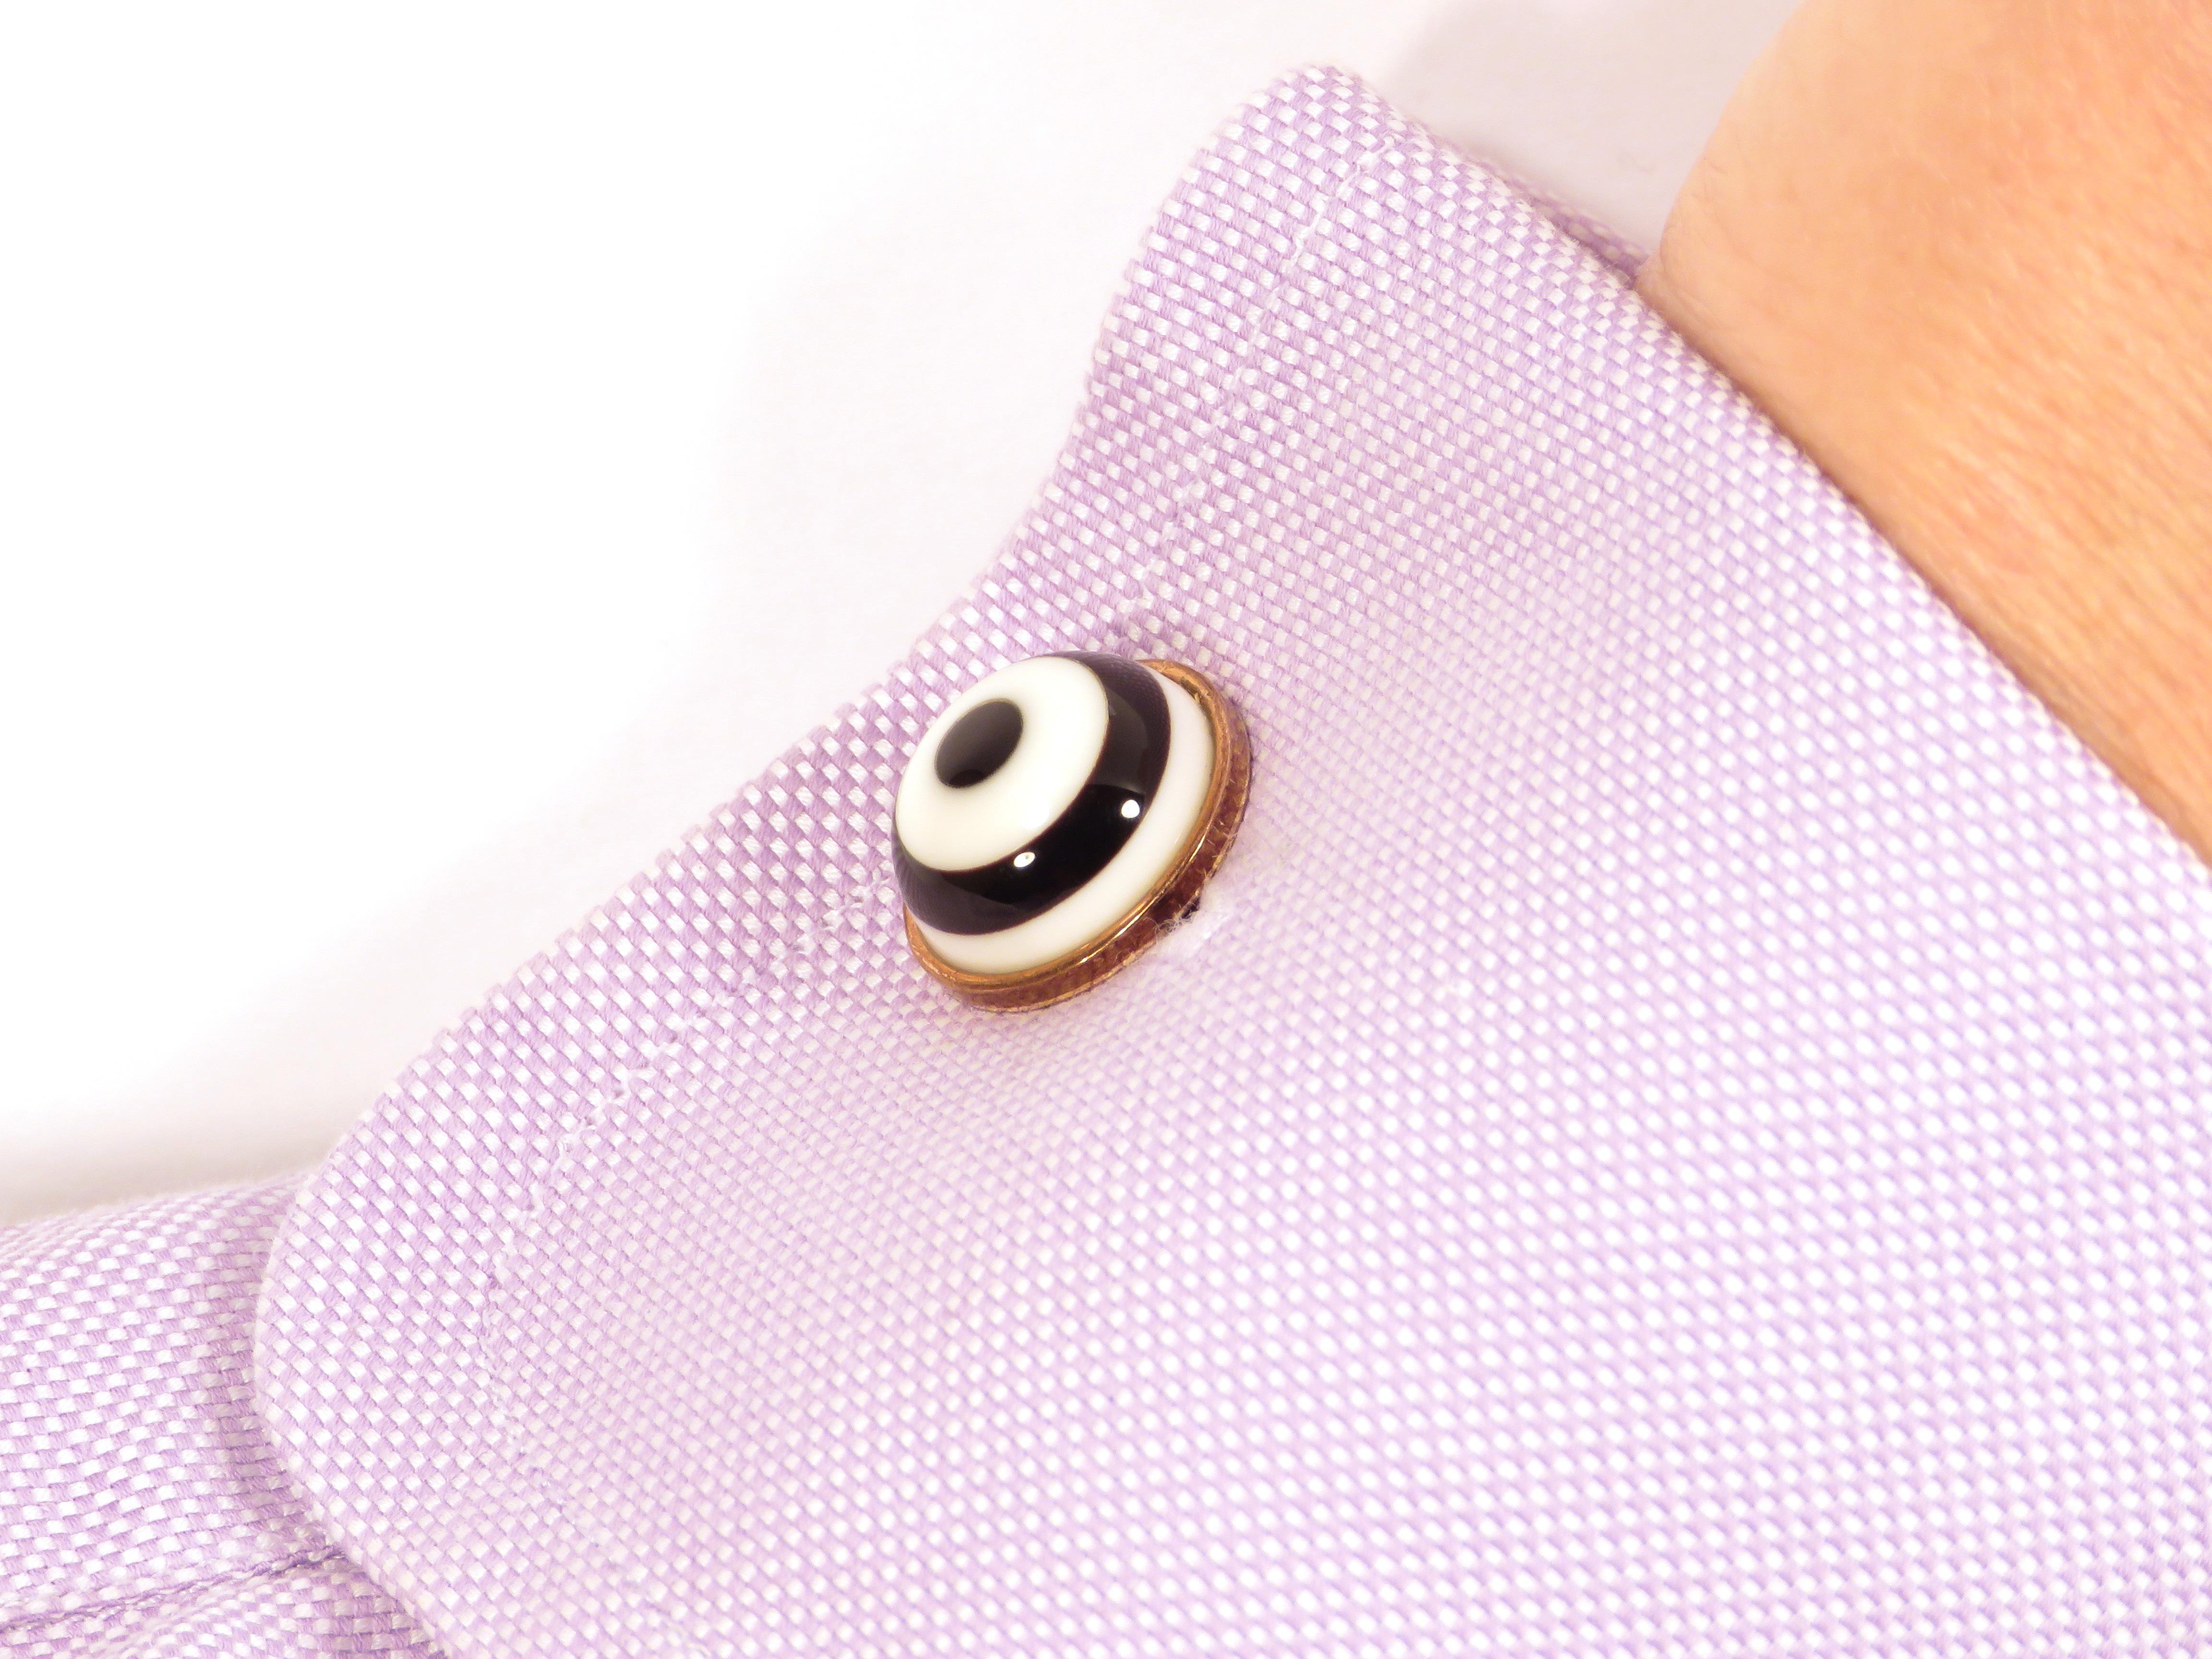 Contemporary White Agate Onyx 9 Karat Gold Cufflinks Handcrafted in Italy by Botta Gioielli